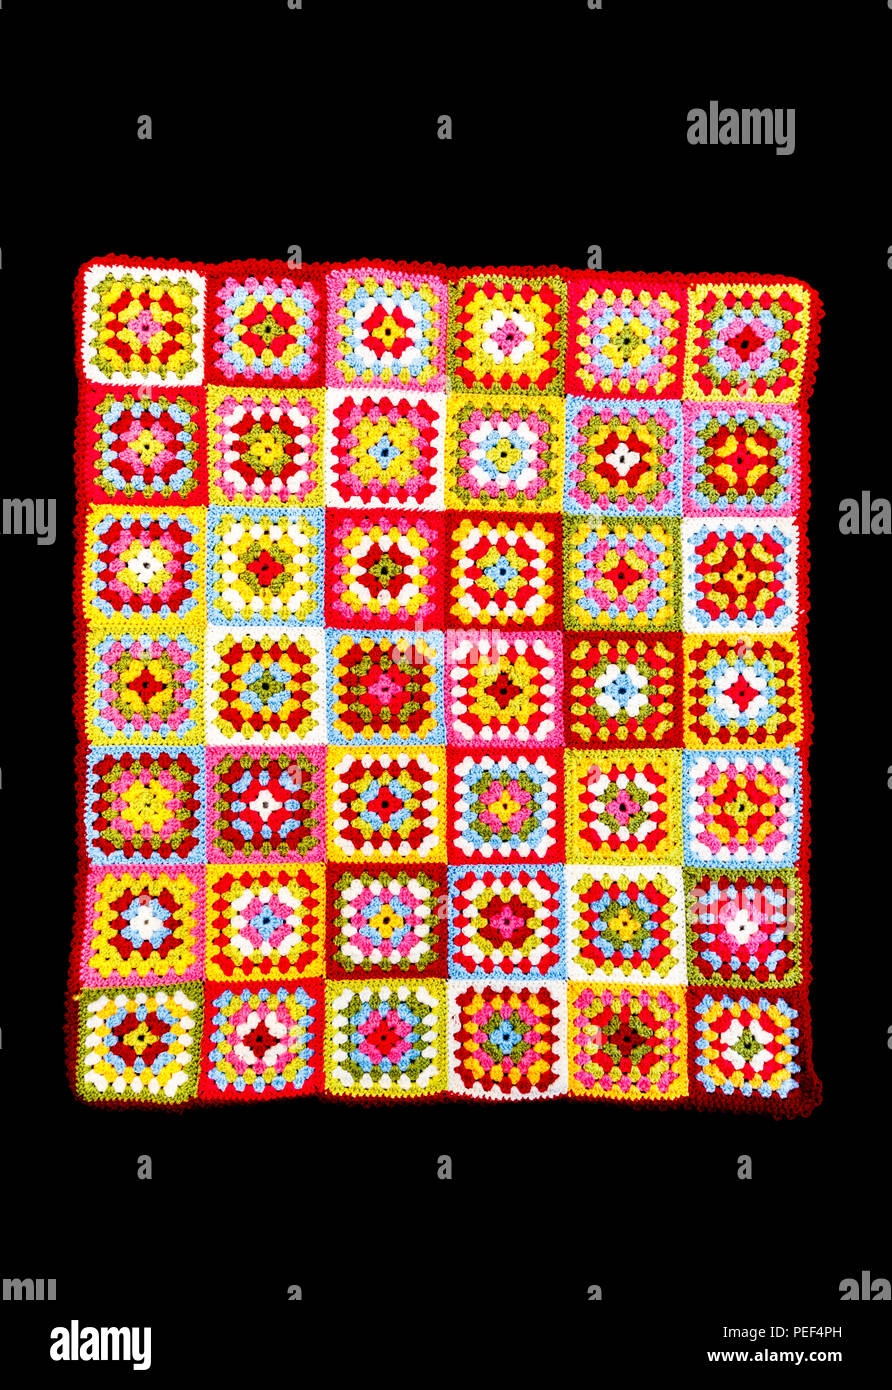 Brightly coloured rectangular granny square woollen baby blanket, traditional hand made crochet home handicraft, against a black background Stock Photo